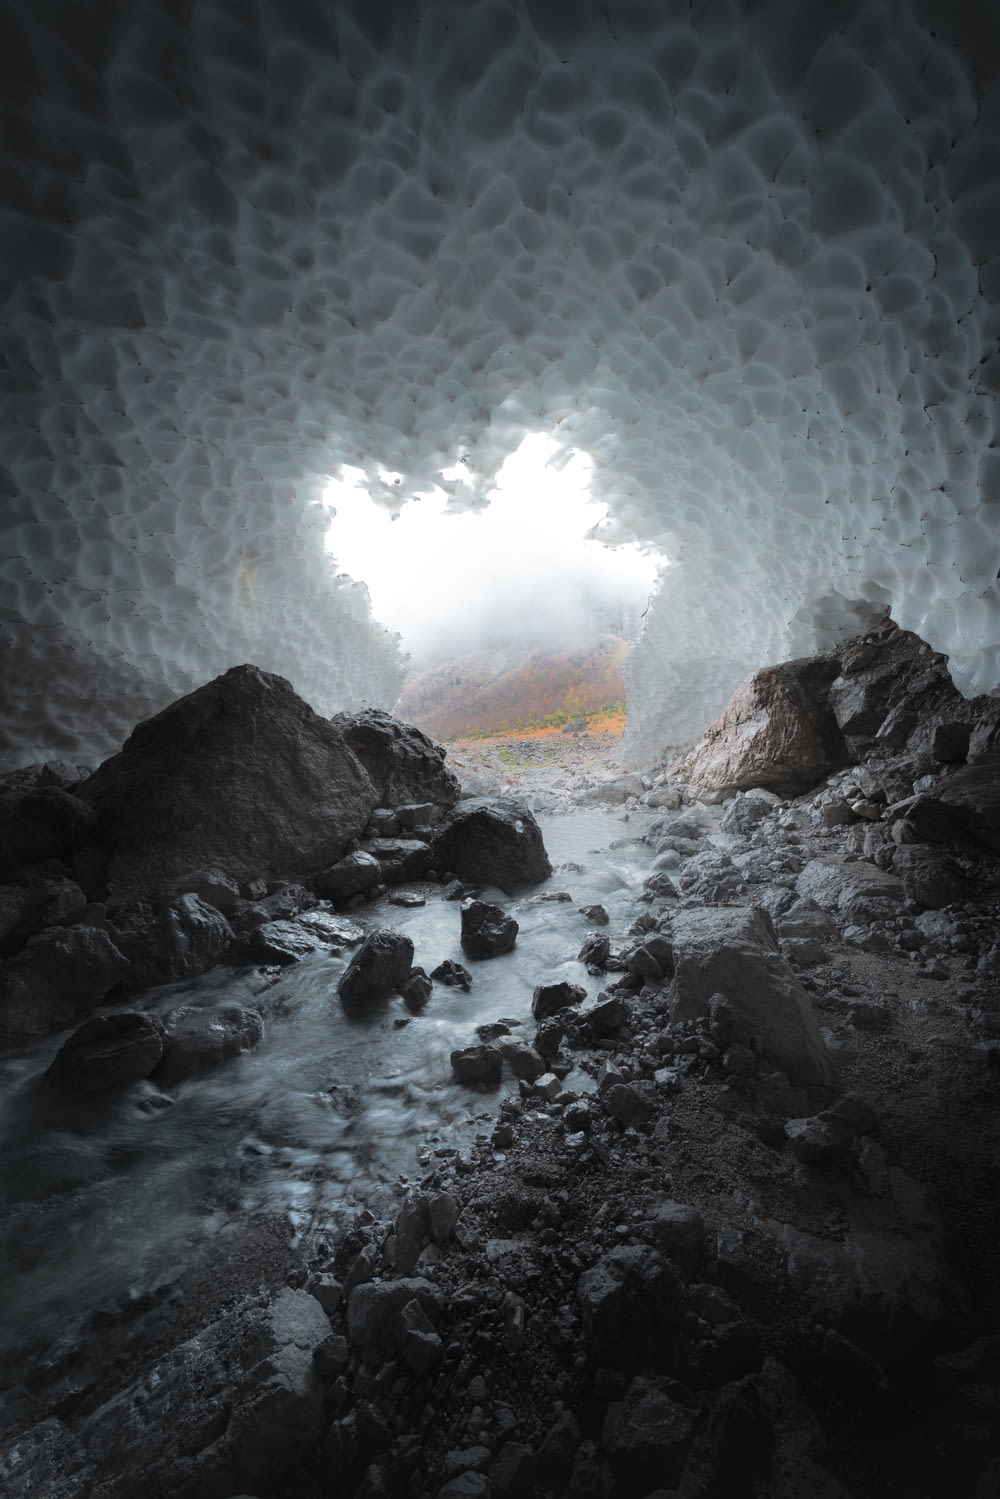 a cave filled with rocks and water under a cloudy sky